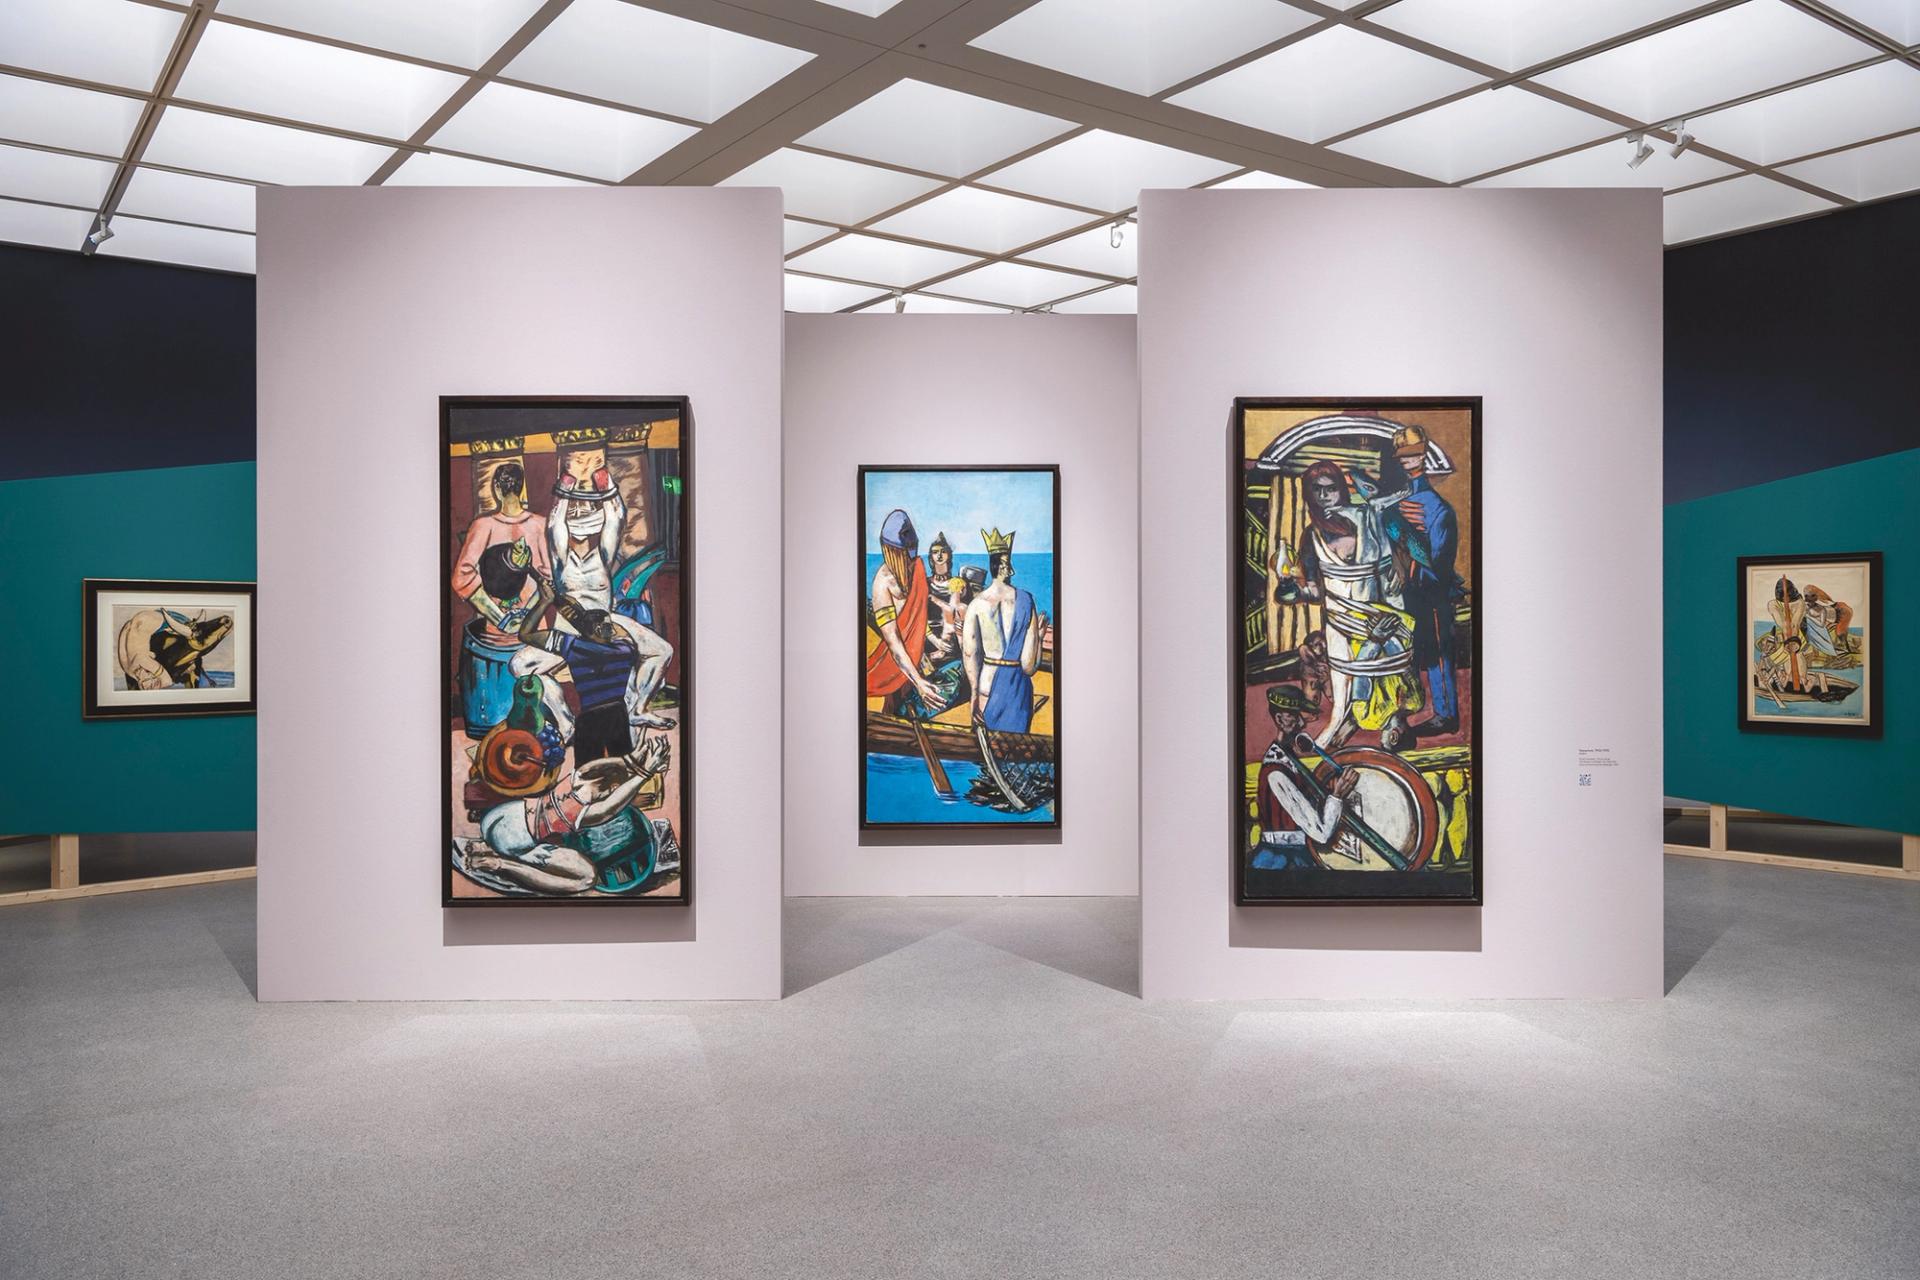 “Maniacal and majestic”: the exhibition takes its name from the Departure triptych, created by Beckmann between 1932 and 1935 Photo: Haydar Koyupinar/Bayerische Staatsgemäldesammlungen

